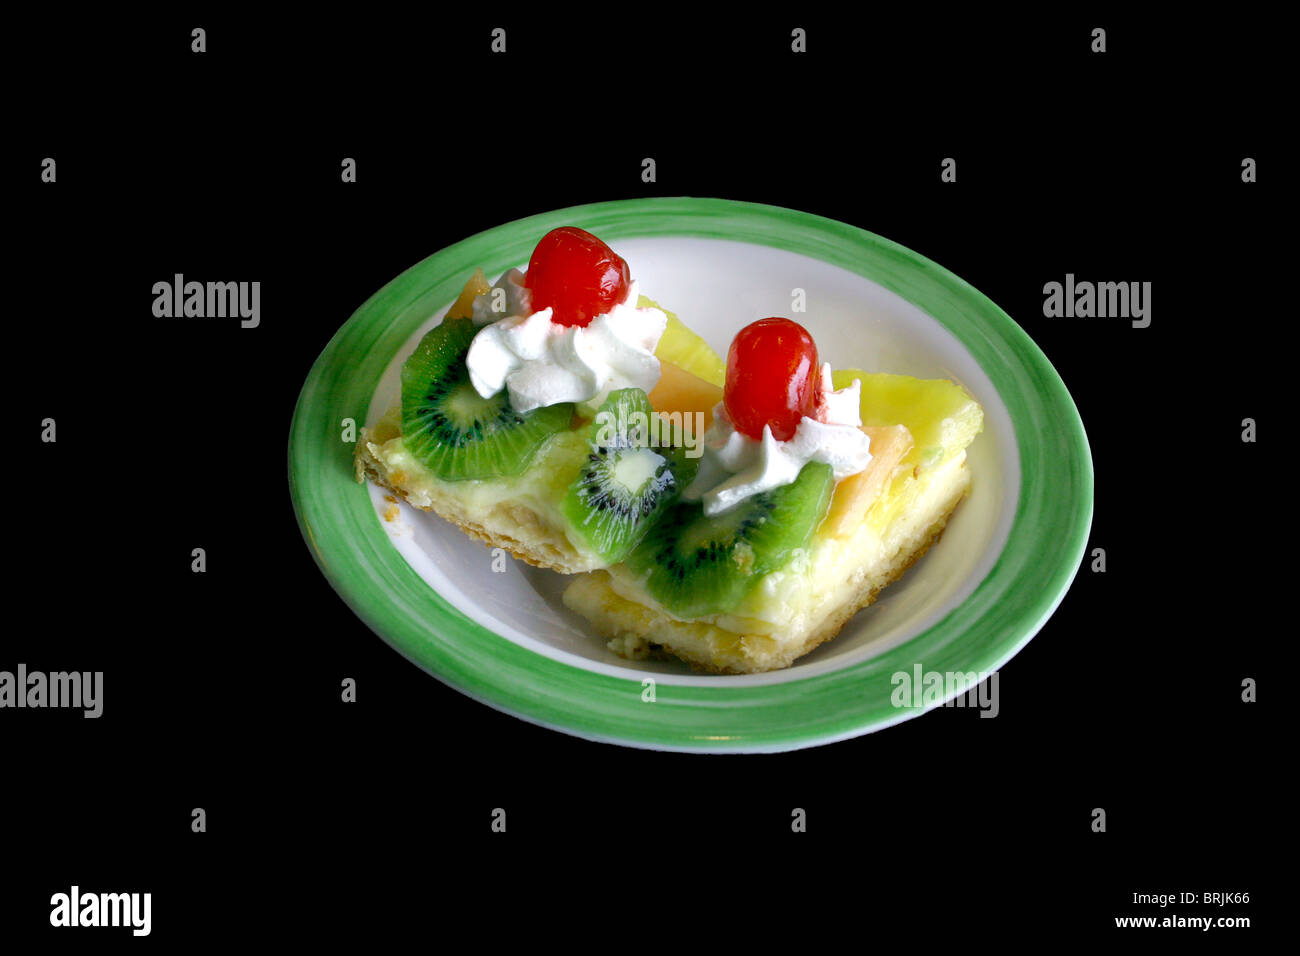 Two bite sized pastry deserts in a bowl. Stock Photo